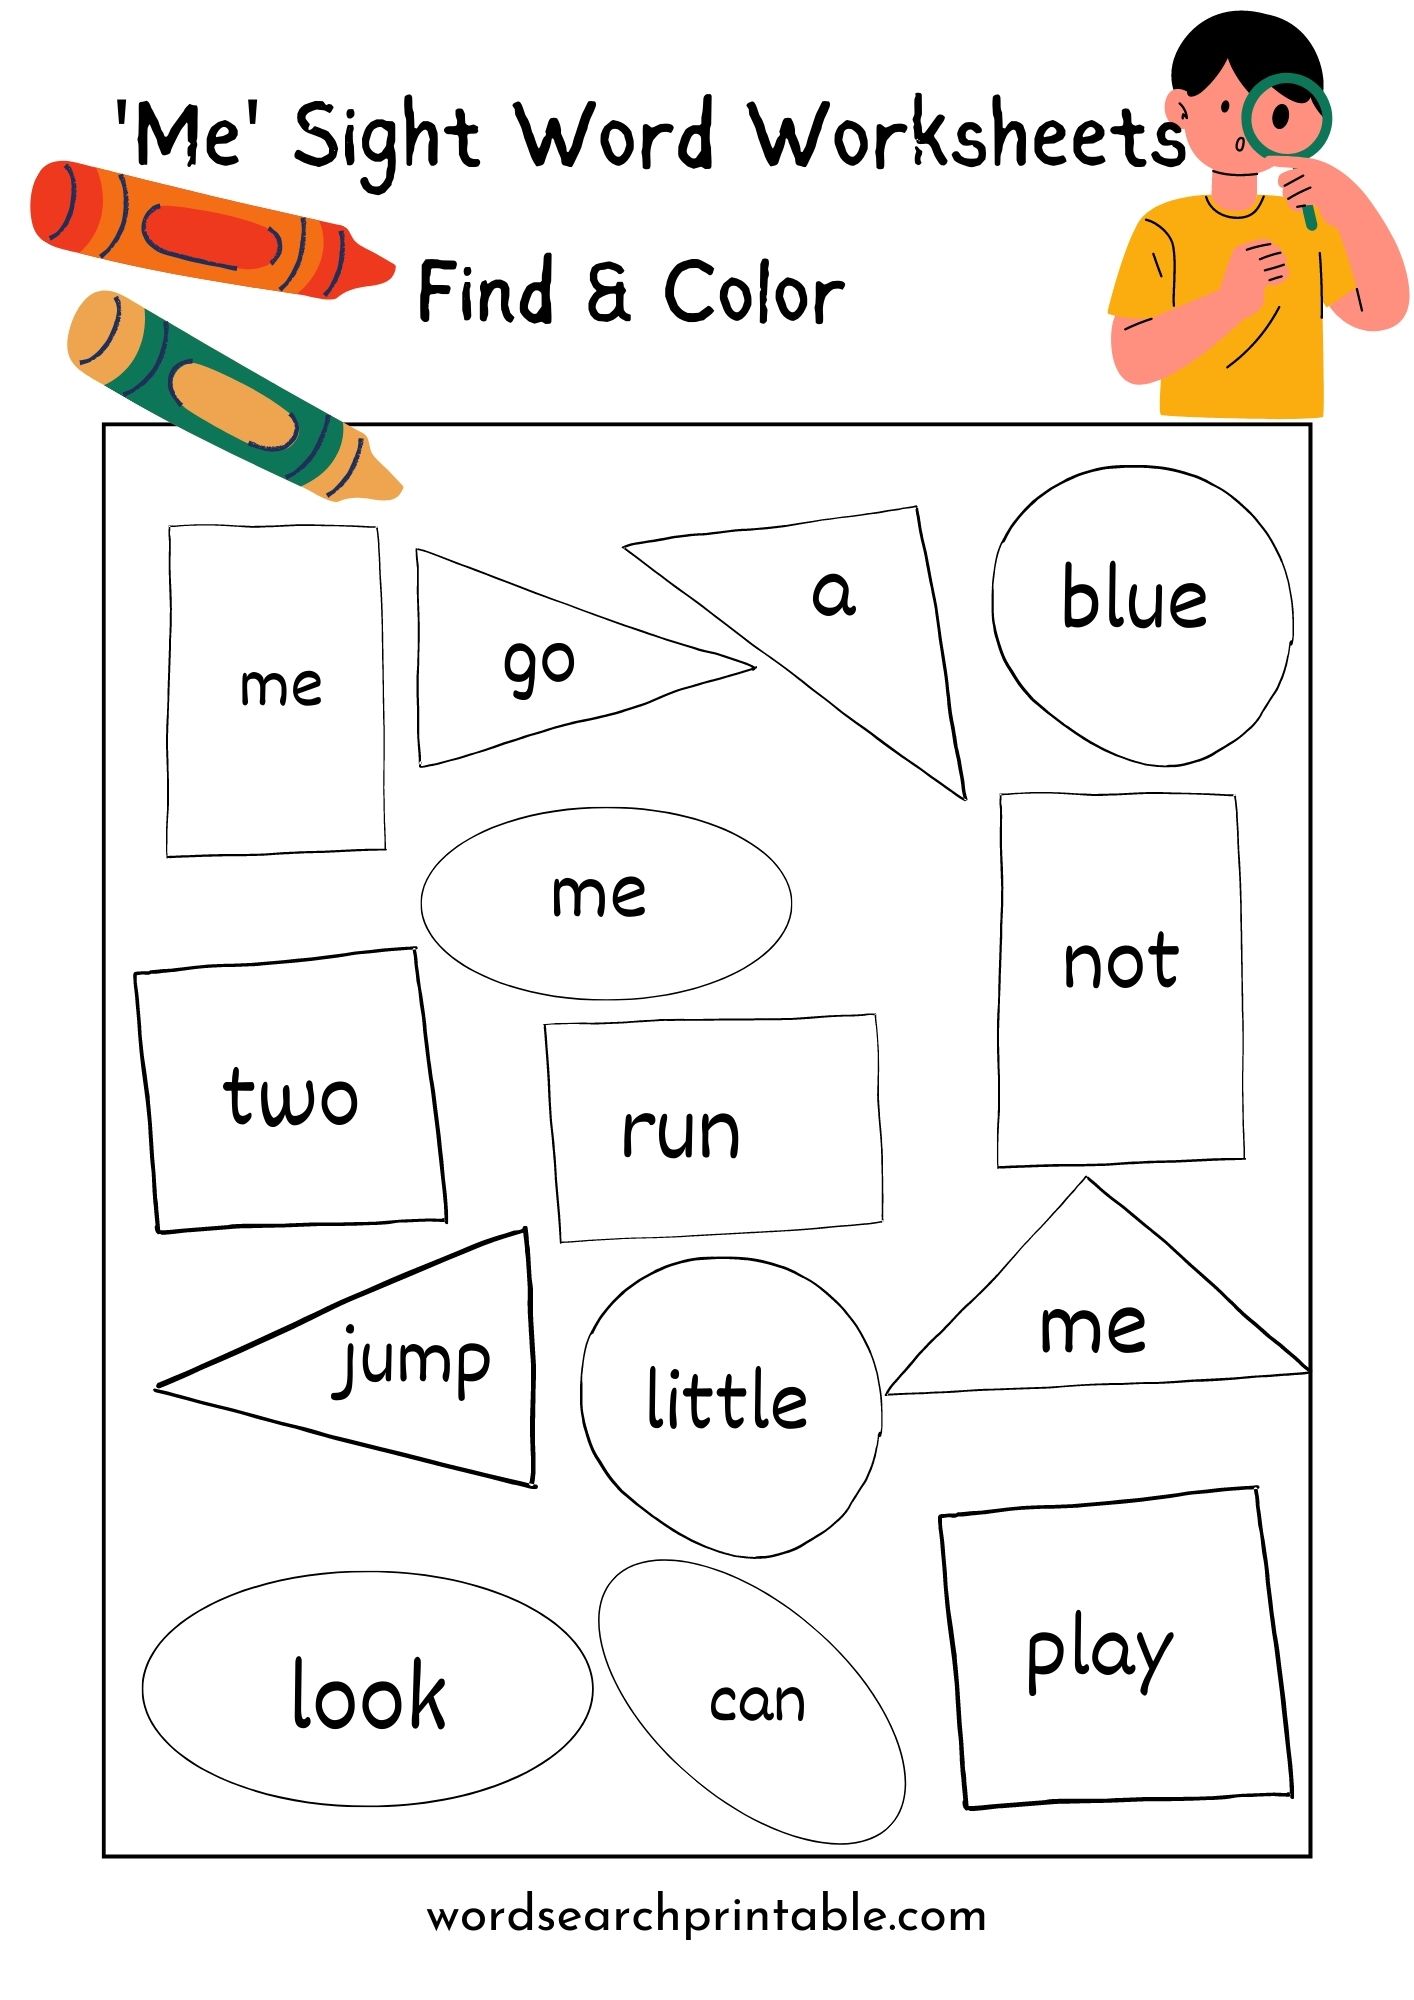 Find sight word Me and Color the geometric shape